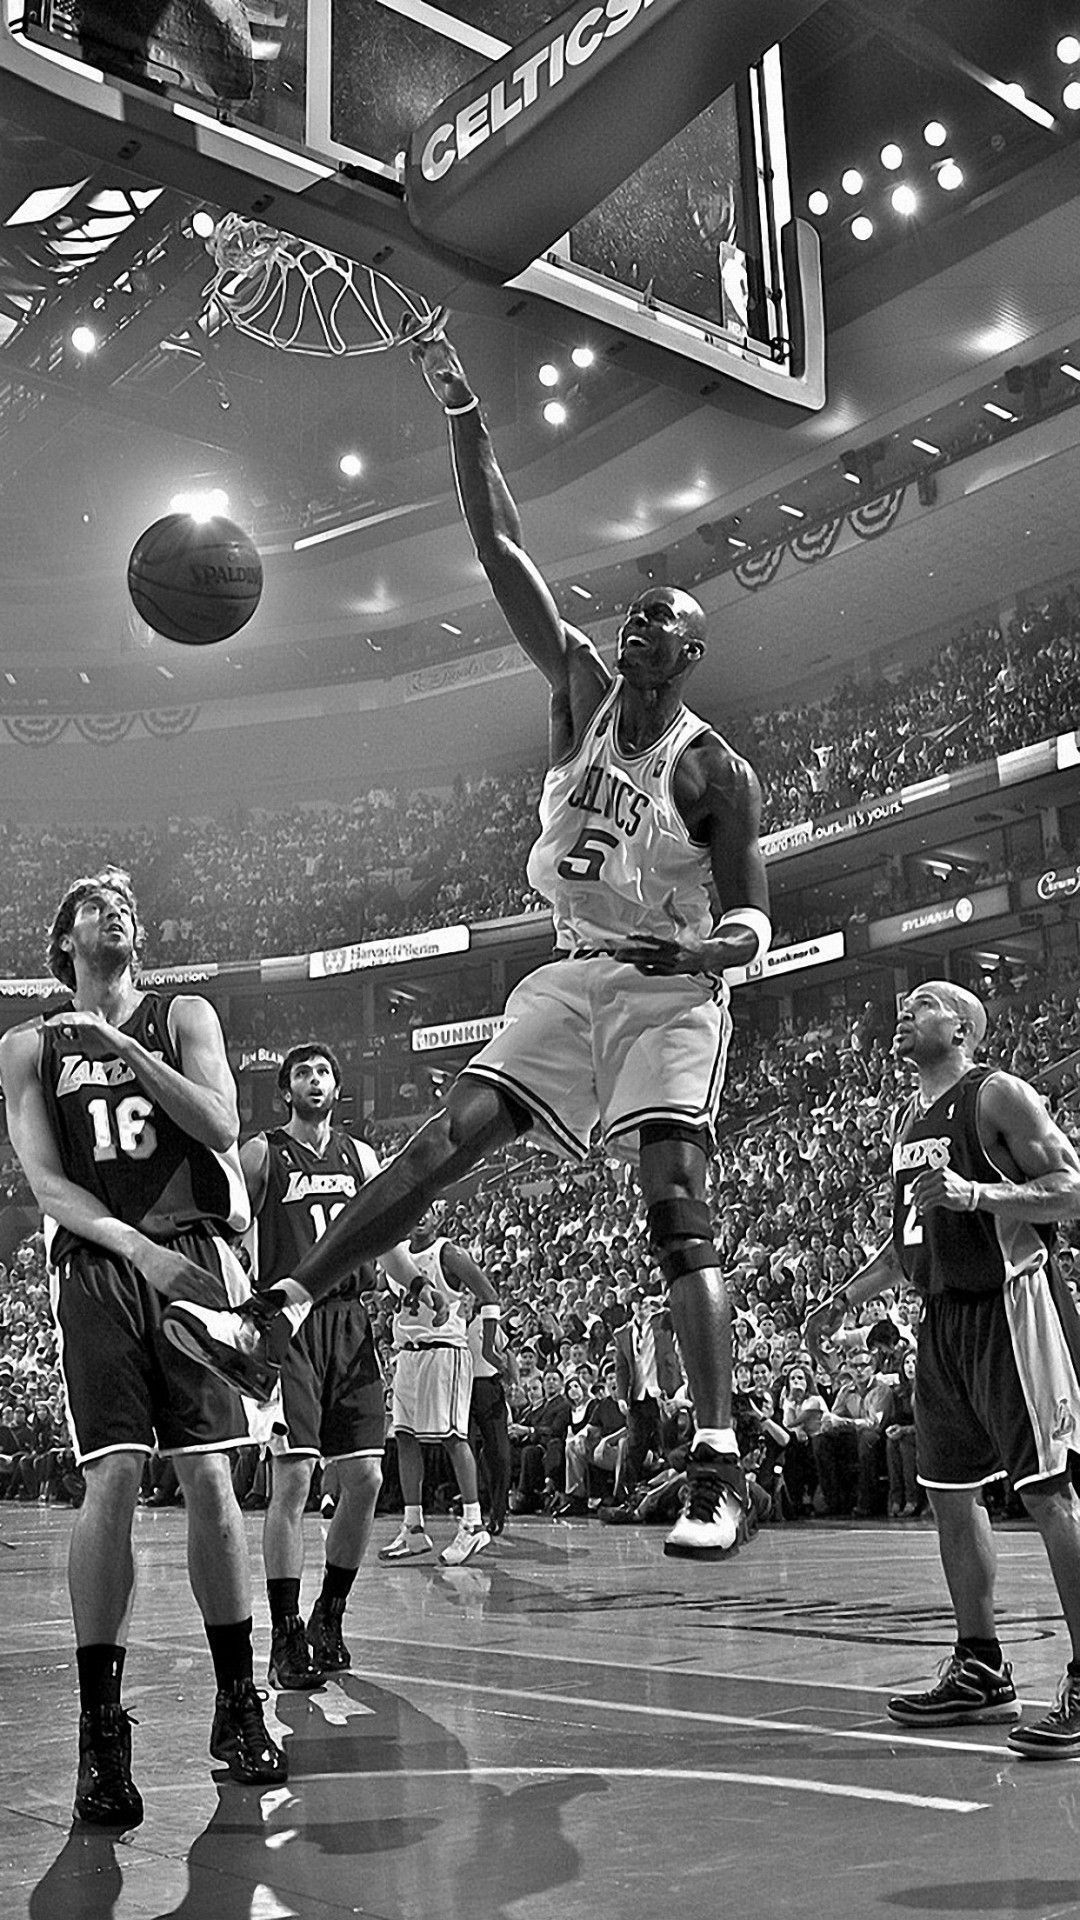 A basketball player in the air with the ball in his hand. - Basketball, NBA